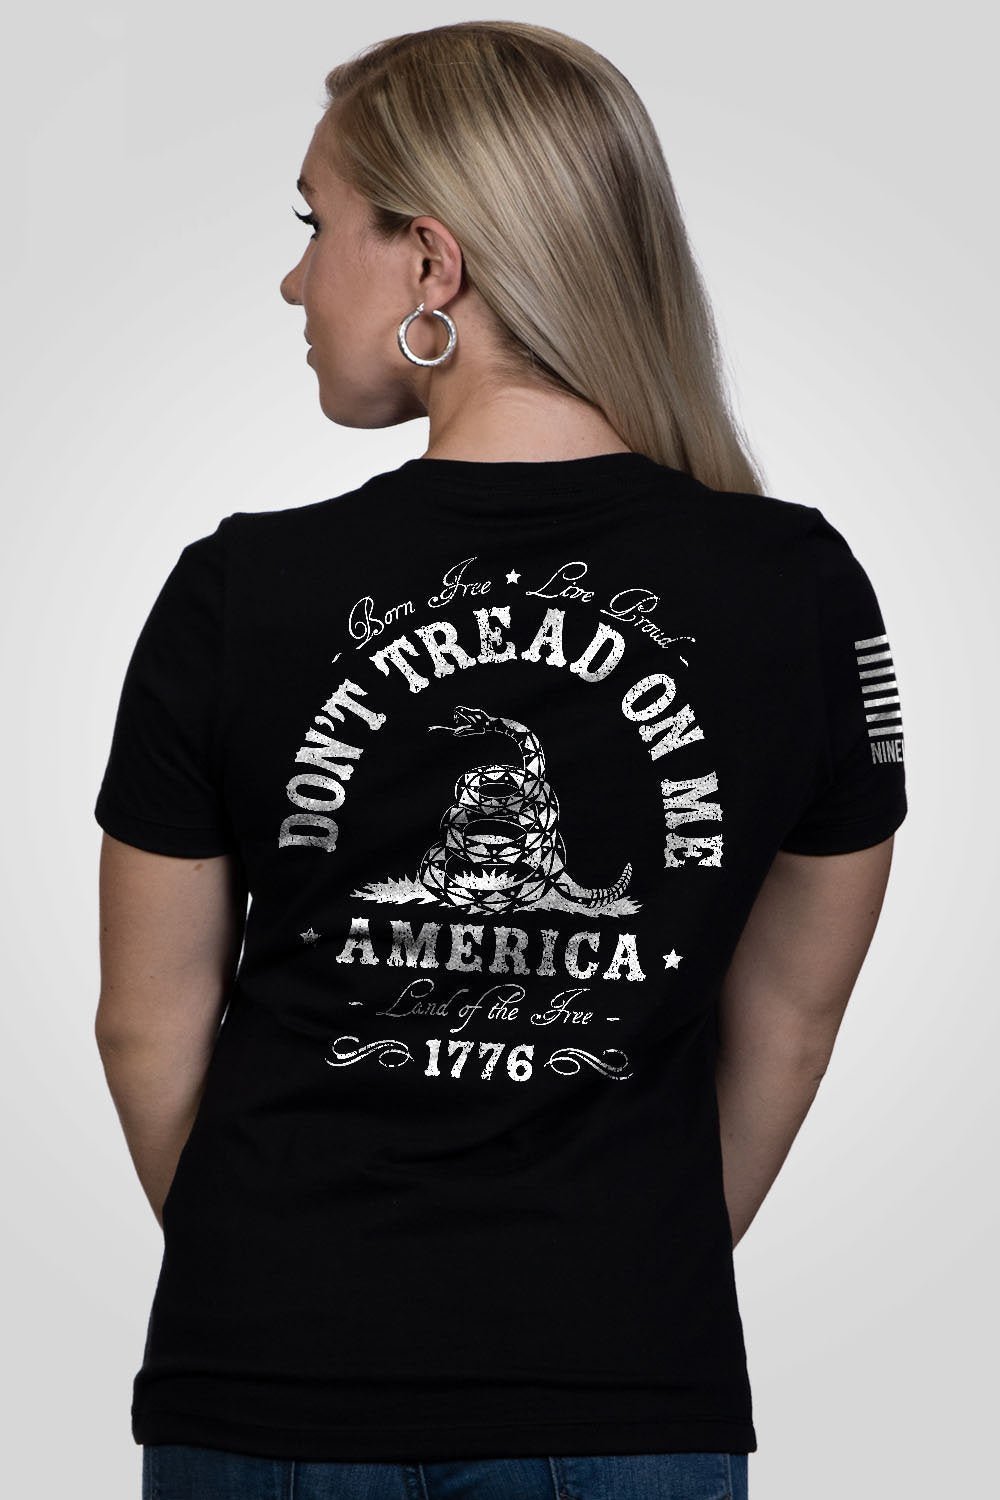 Women's Relaxed Fit V-Neck Shirt - Don't Tread On Me - Nine Line Apparel